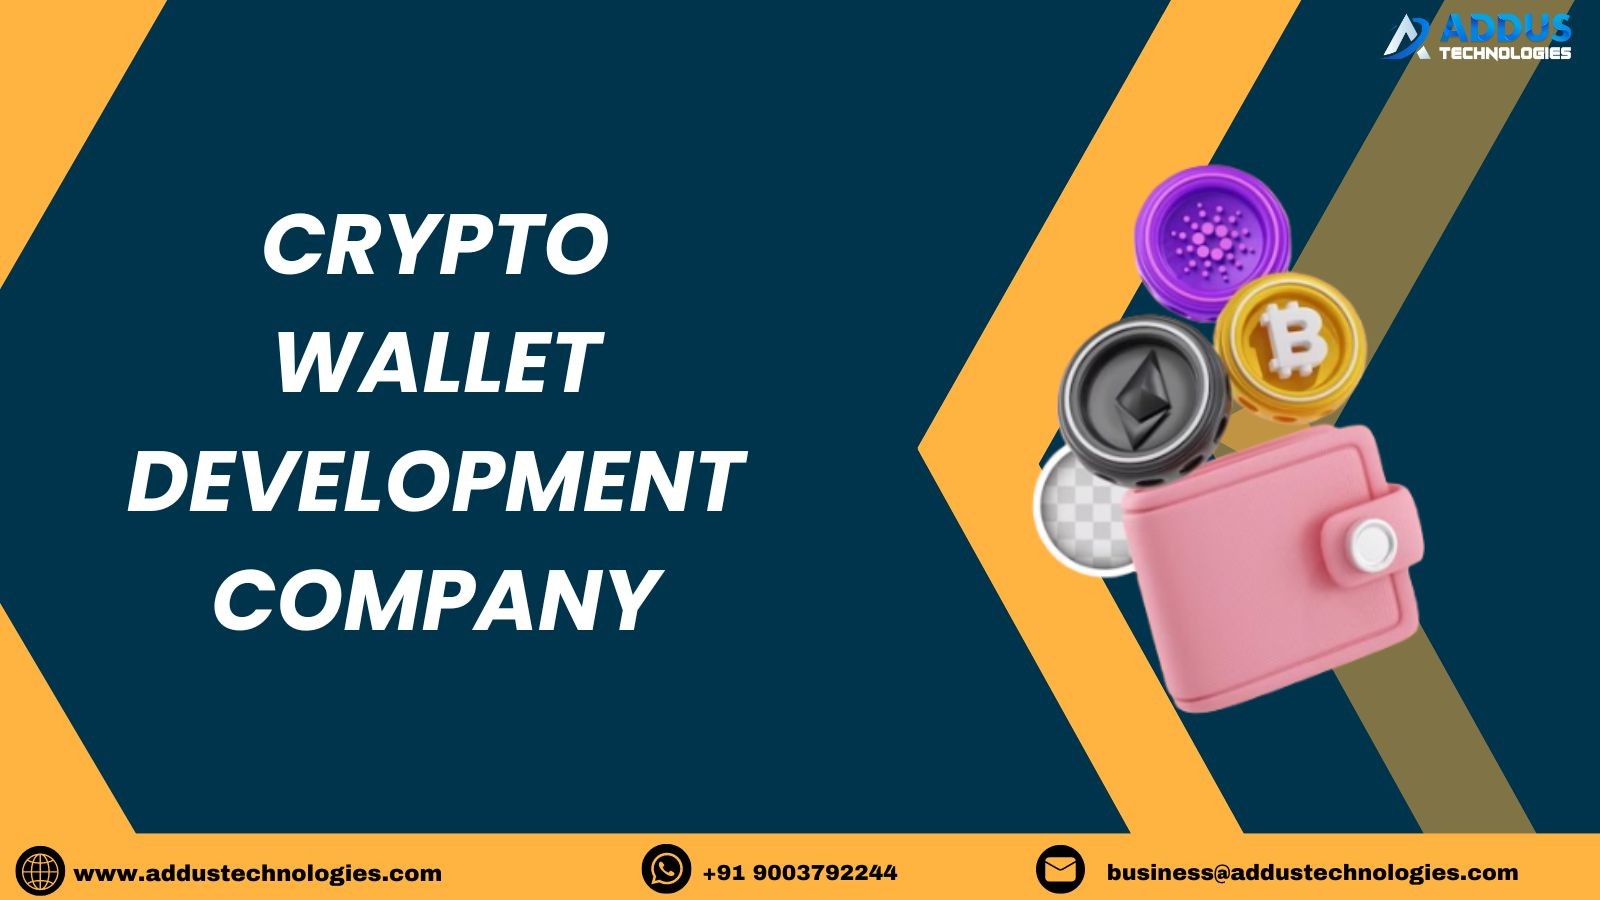 Cryptocurrency wallet development company - Addus Technologies-pic_1